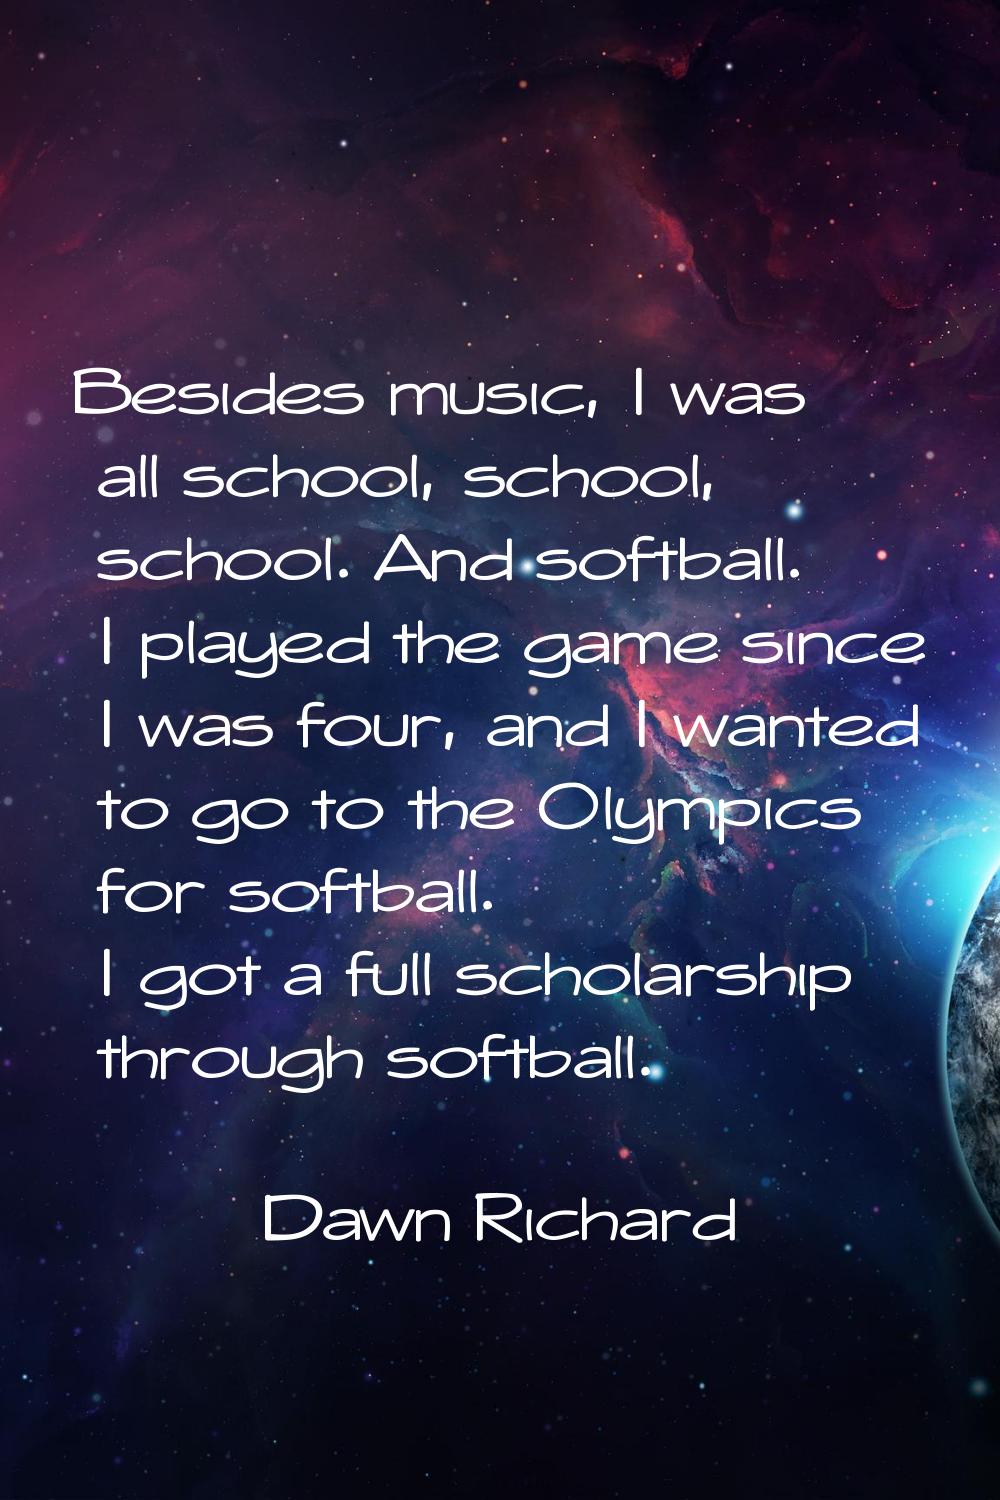 Besides music, I was all school, school, school. And softball. I played the game since I was four, 